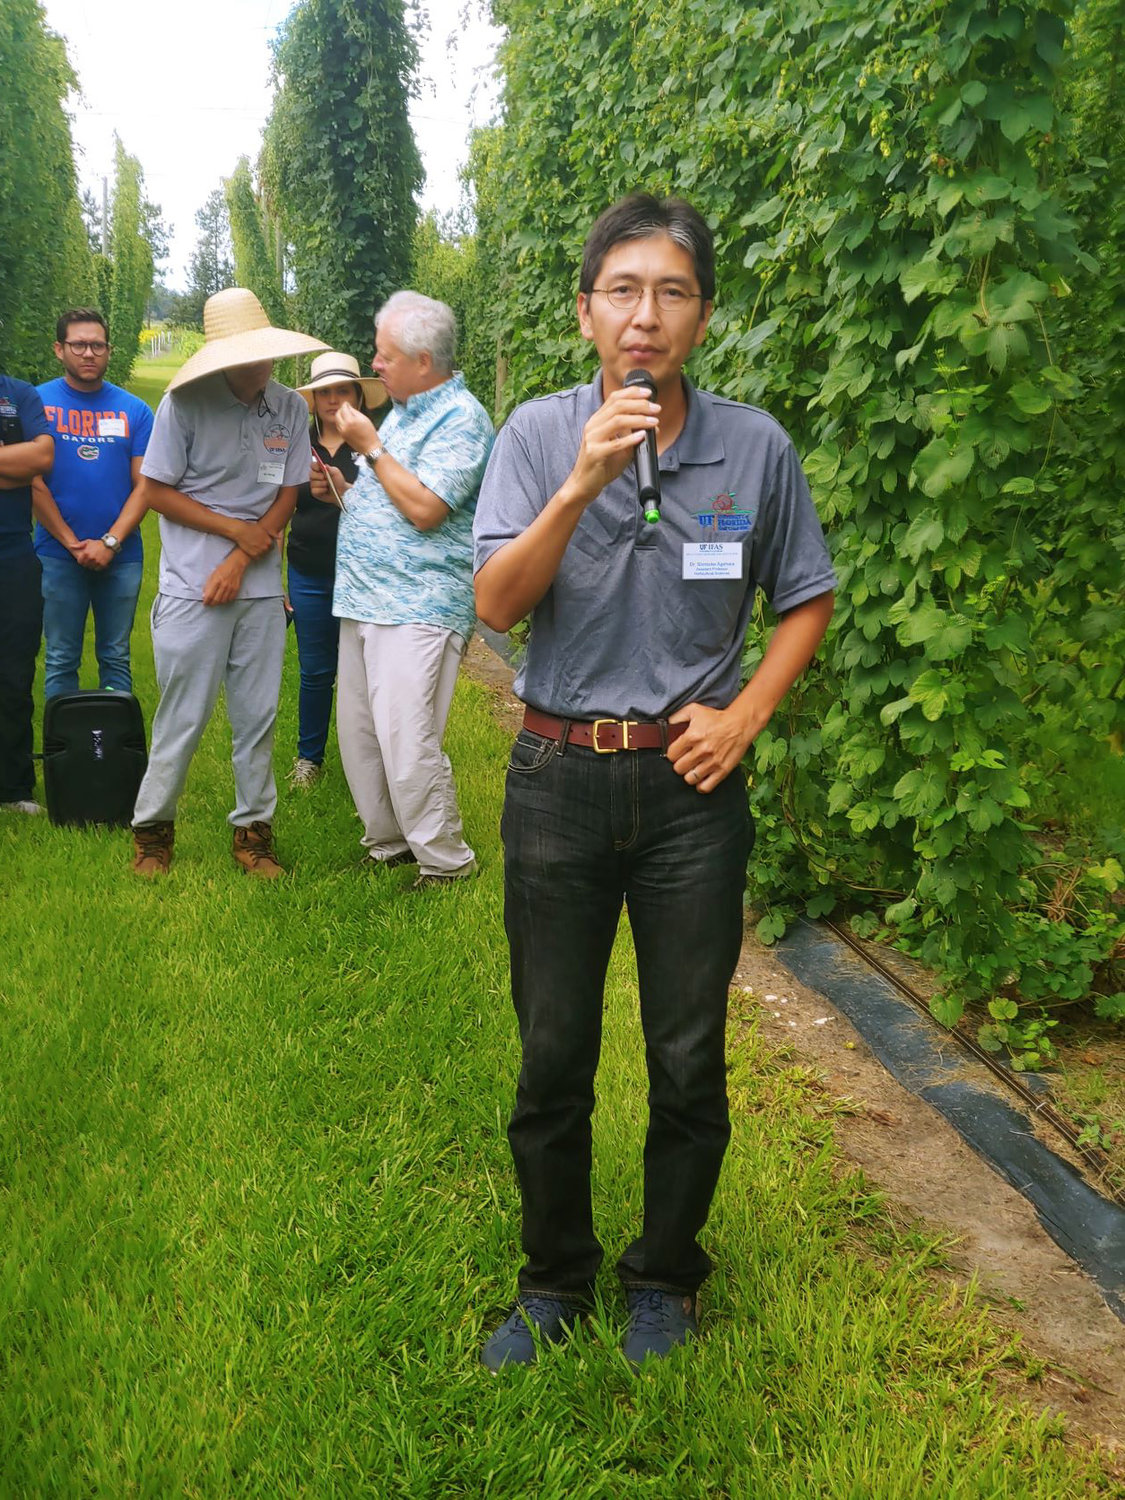 Dr. Shinsuke Agehara, UF/IFAS assistant professor of horticultural sciences, spoke to participants in the hops yard at the Hops Field Day on June 2 at the Gulf Coast Research and Education Center.